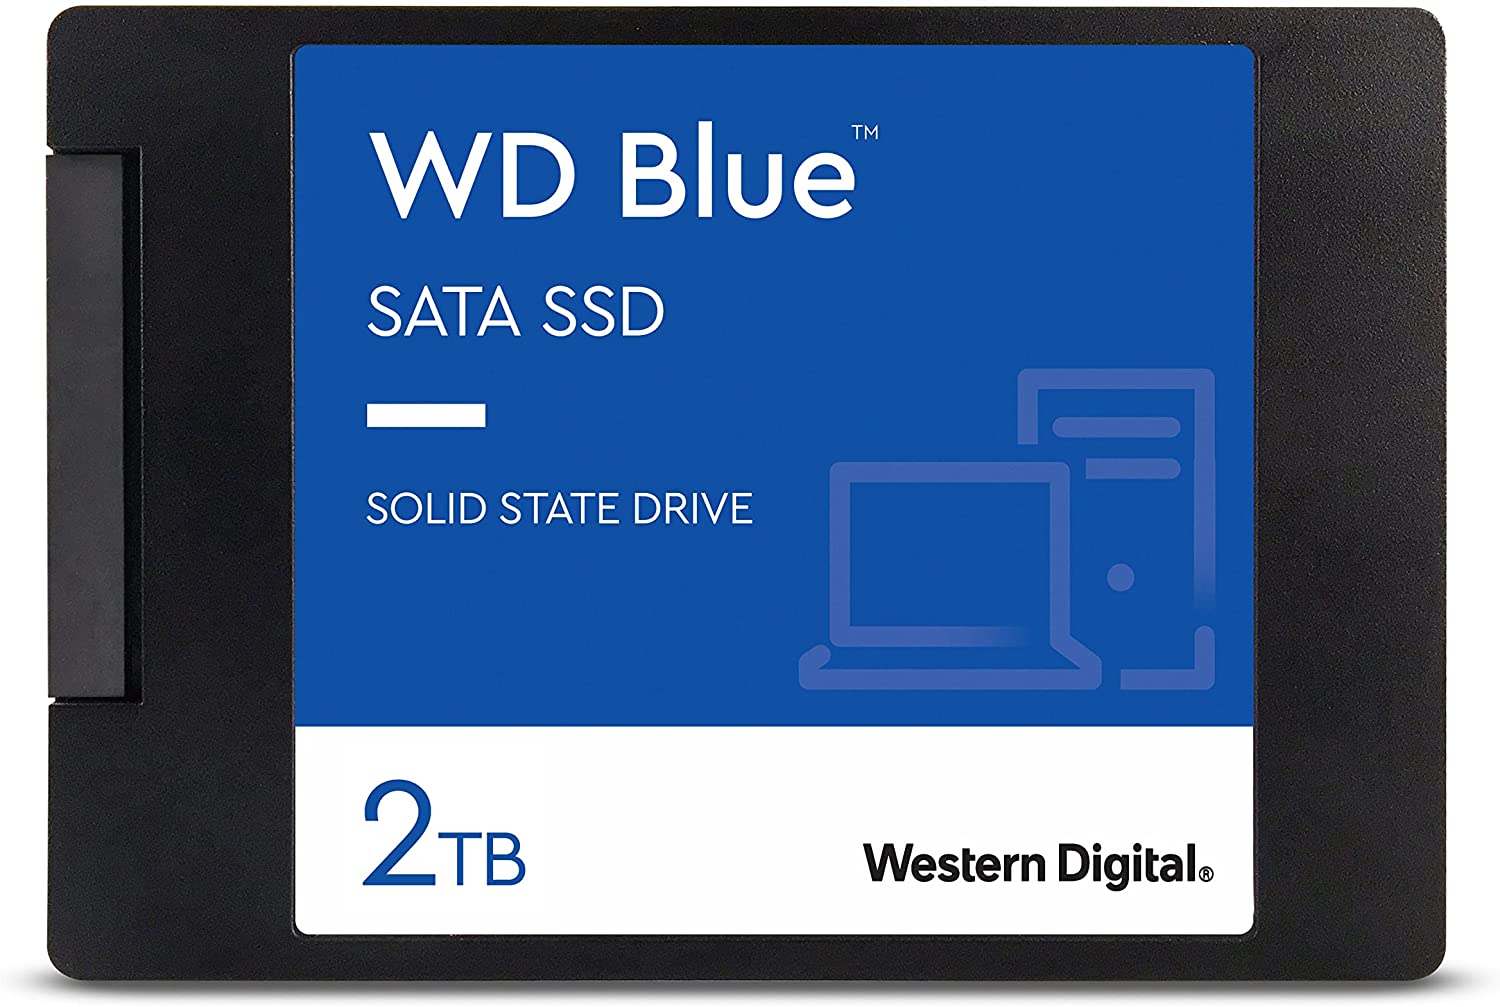 WD Blue 3D NAND Internal PC SSD - SATA III 6 Gb/s, 2.5"/7mm, Up to 560 MB/s